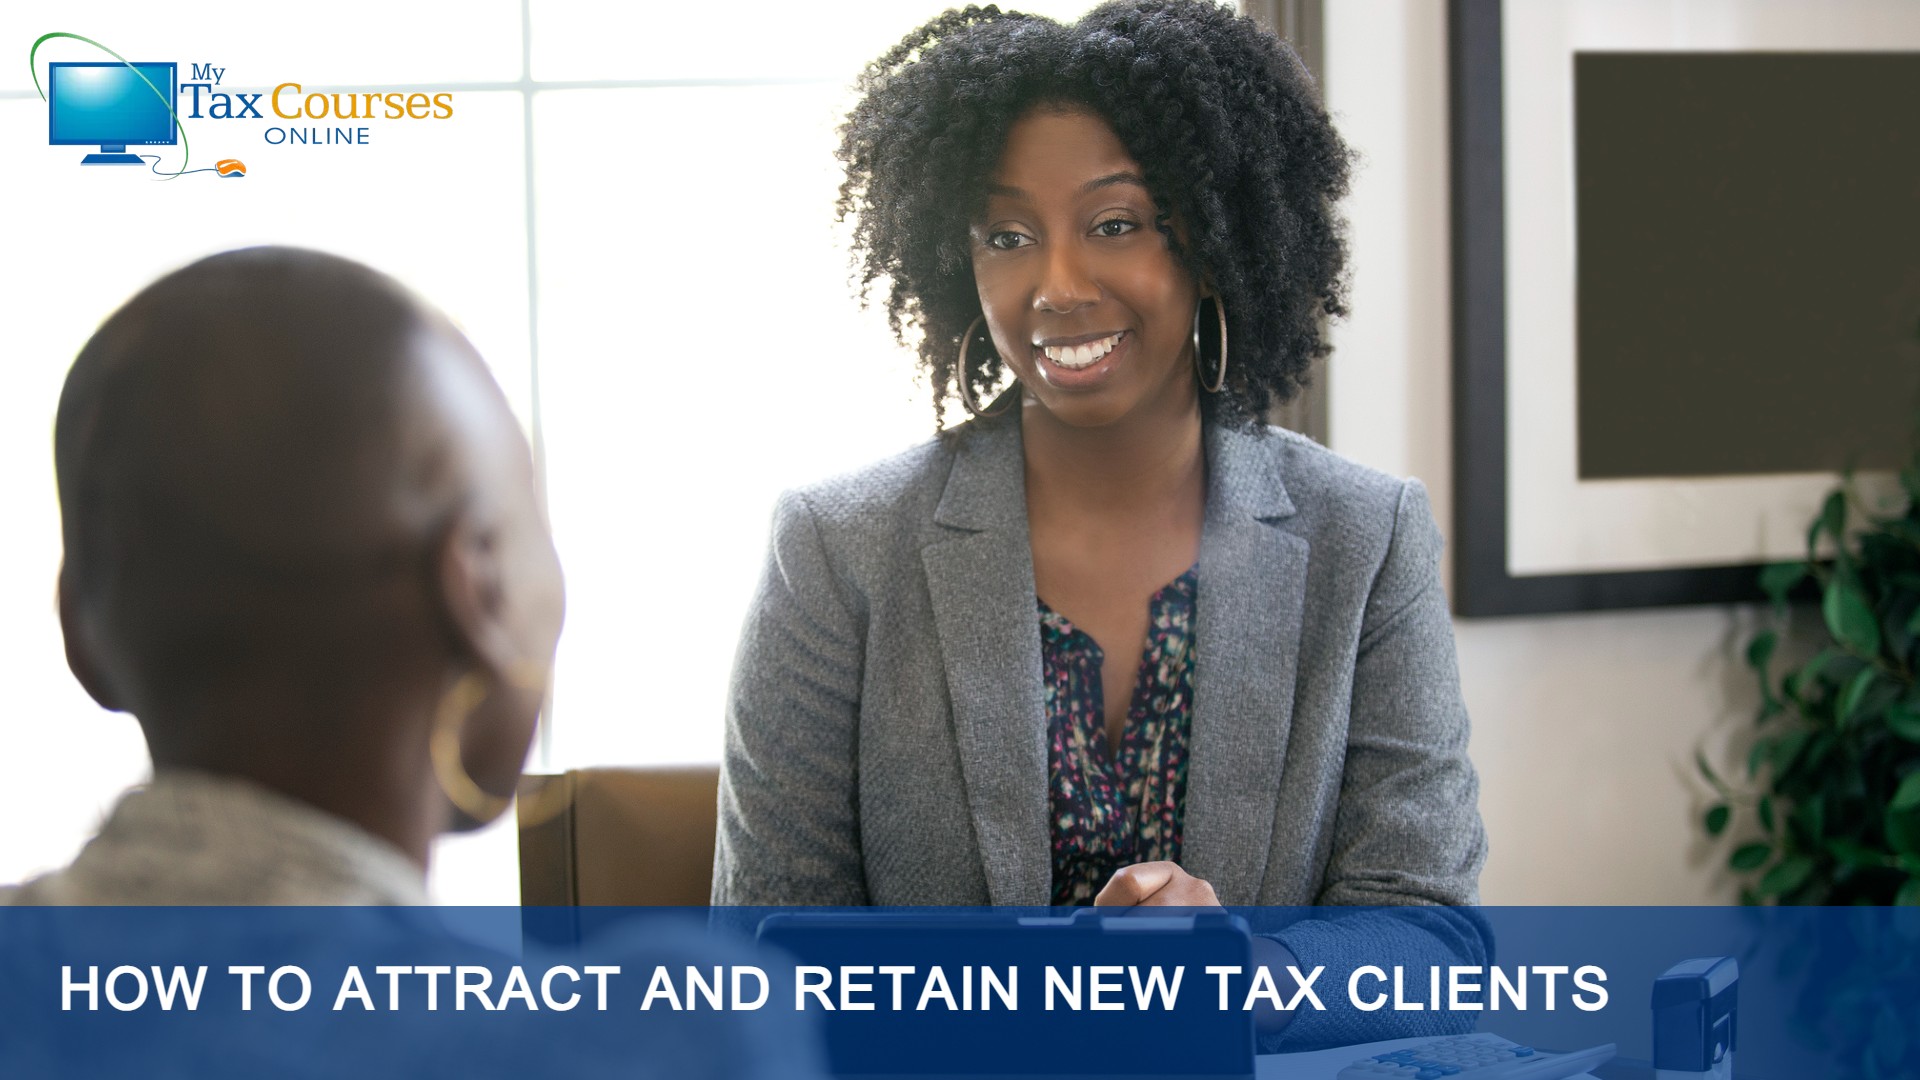 How to Attract and Retain New Tax Clients